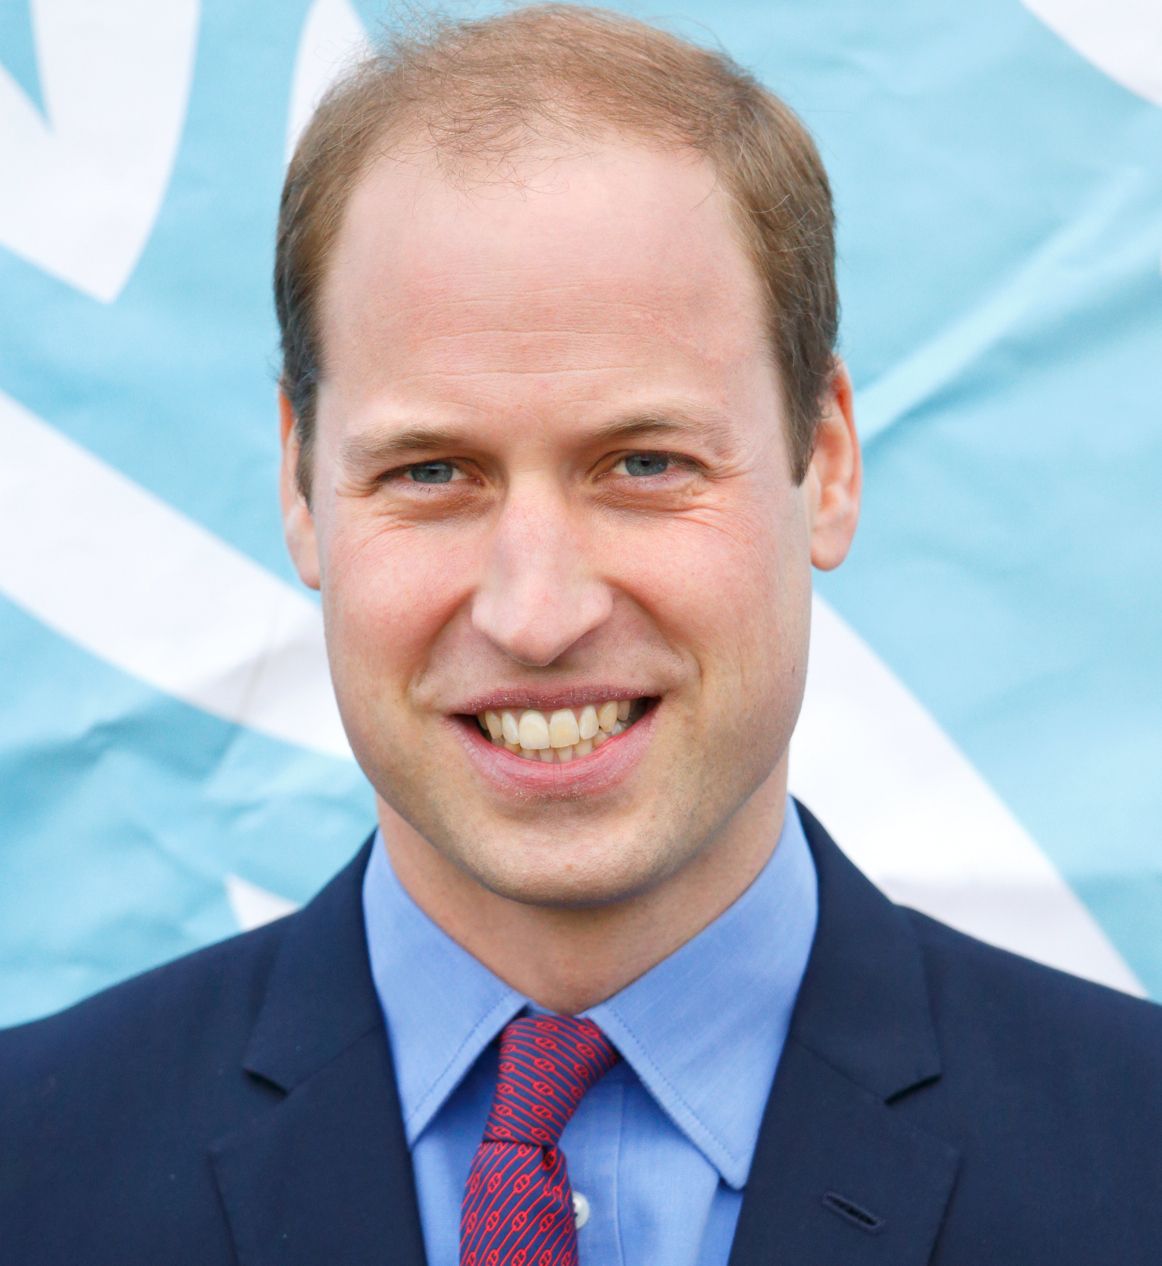 Prince William: Biography, Prince of Wales, Heir to the Throne